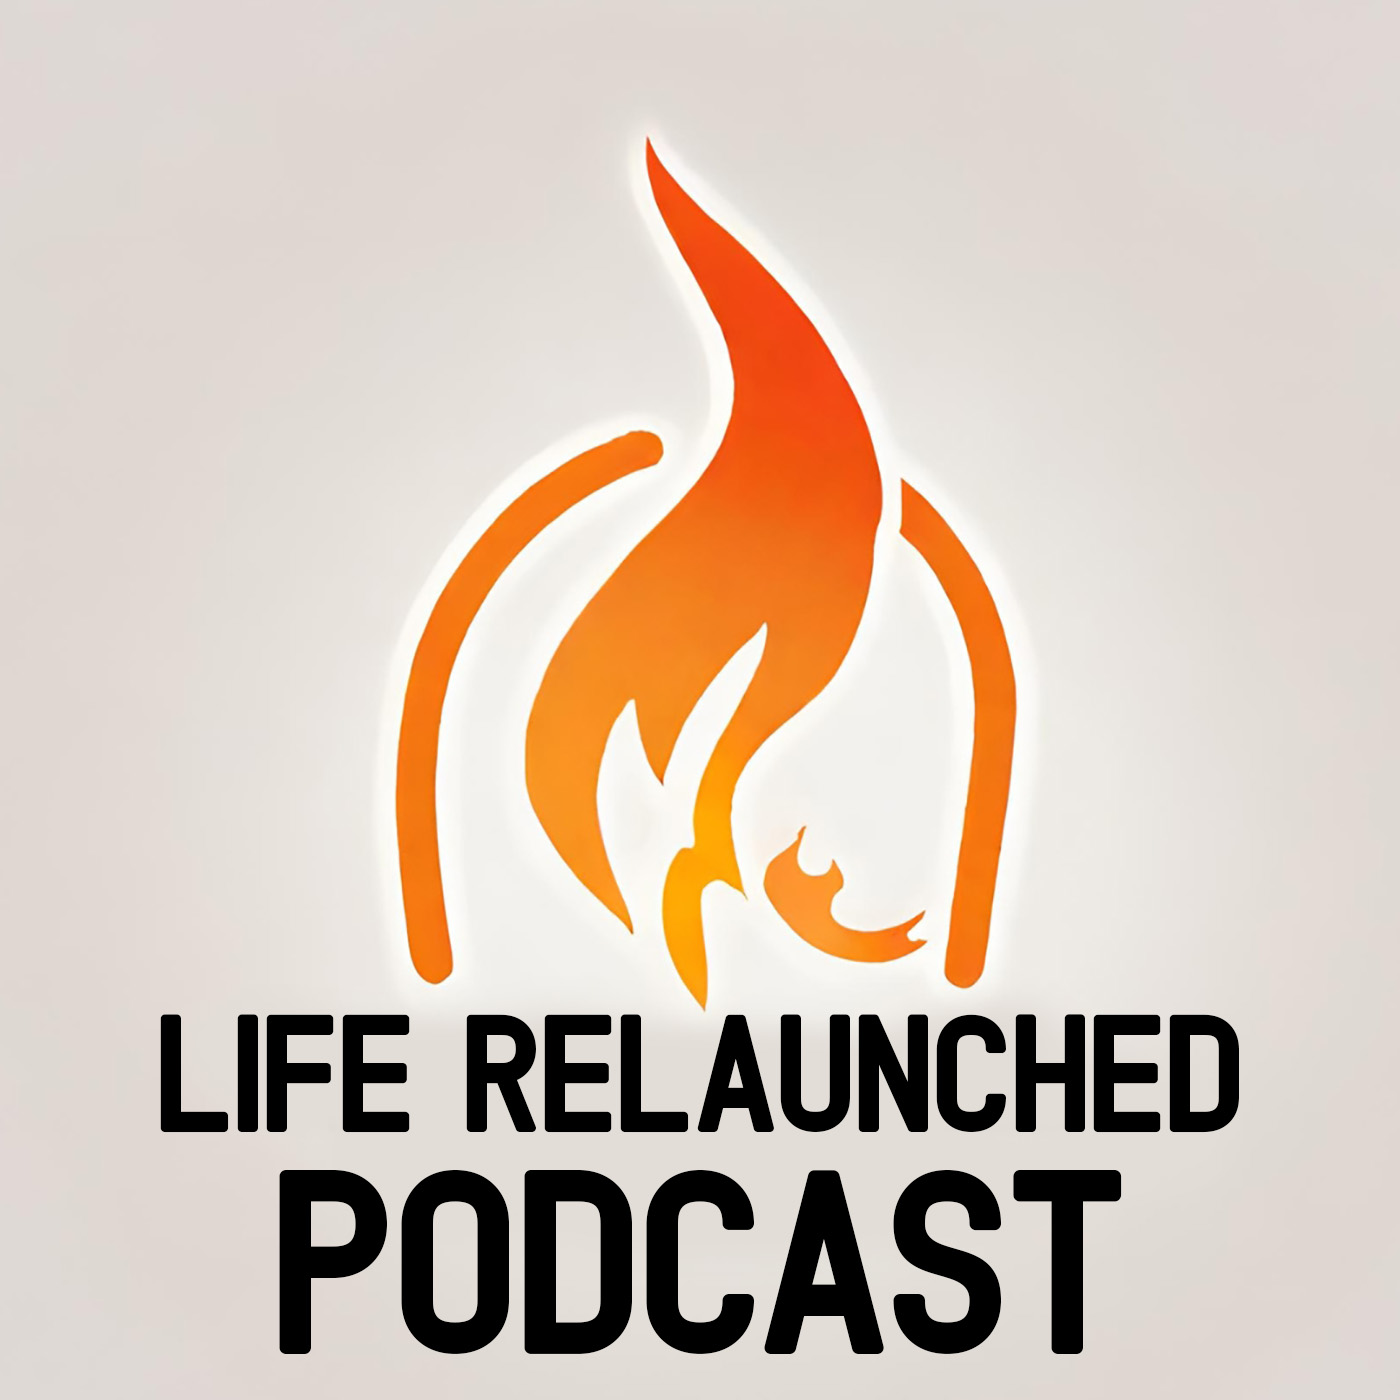 Life Relaunched Podcast Artwork